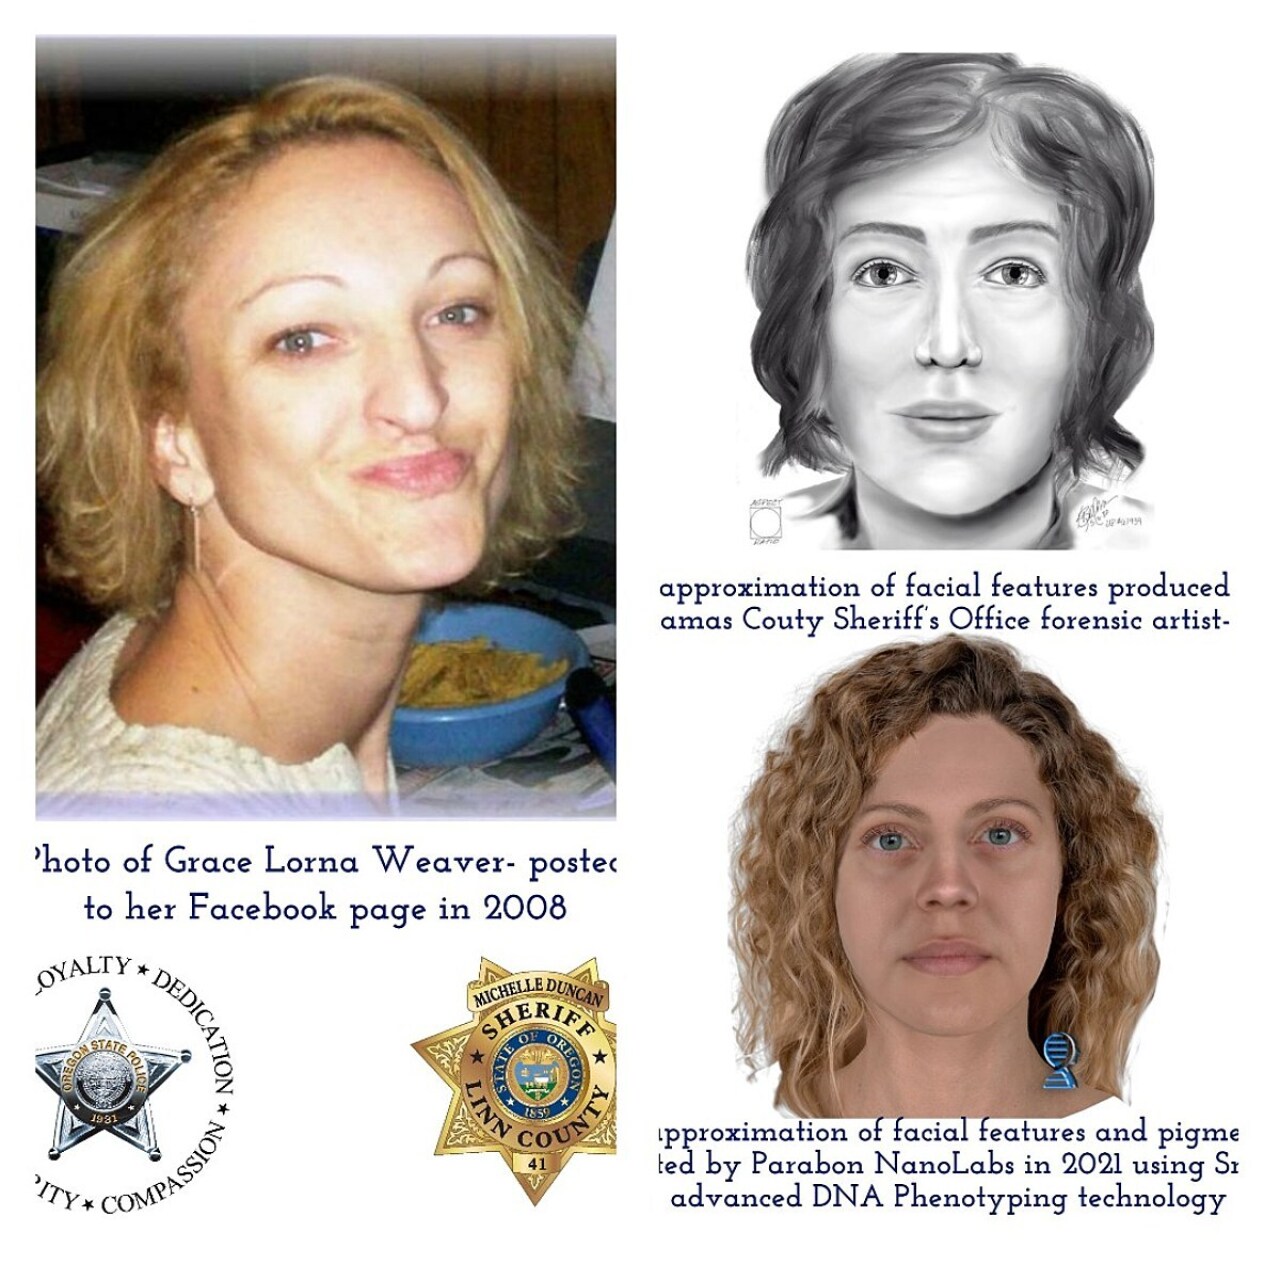 [IMAGE] Human Remains Found in 2020 Identified as Missing WA Woman